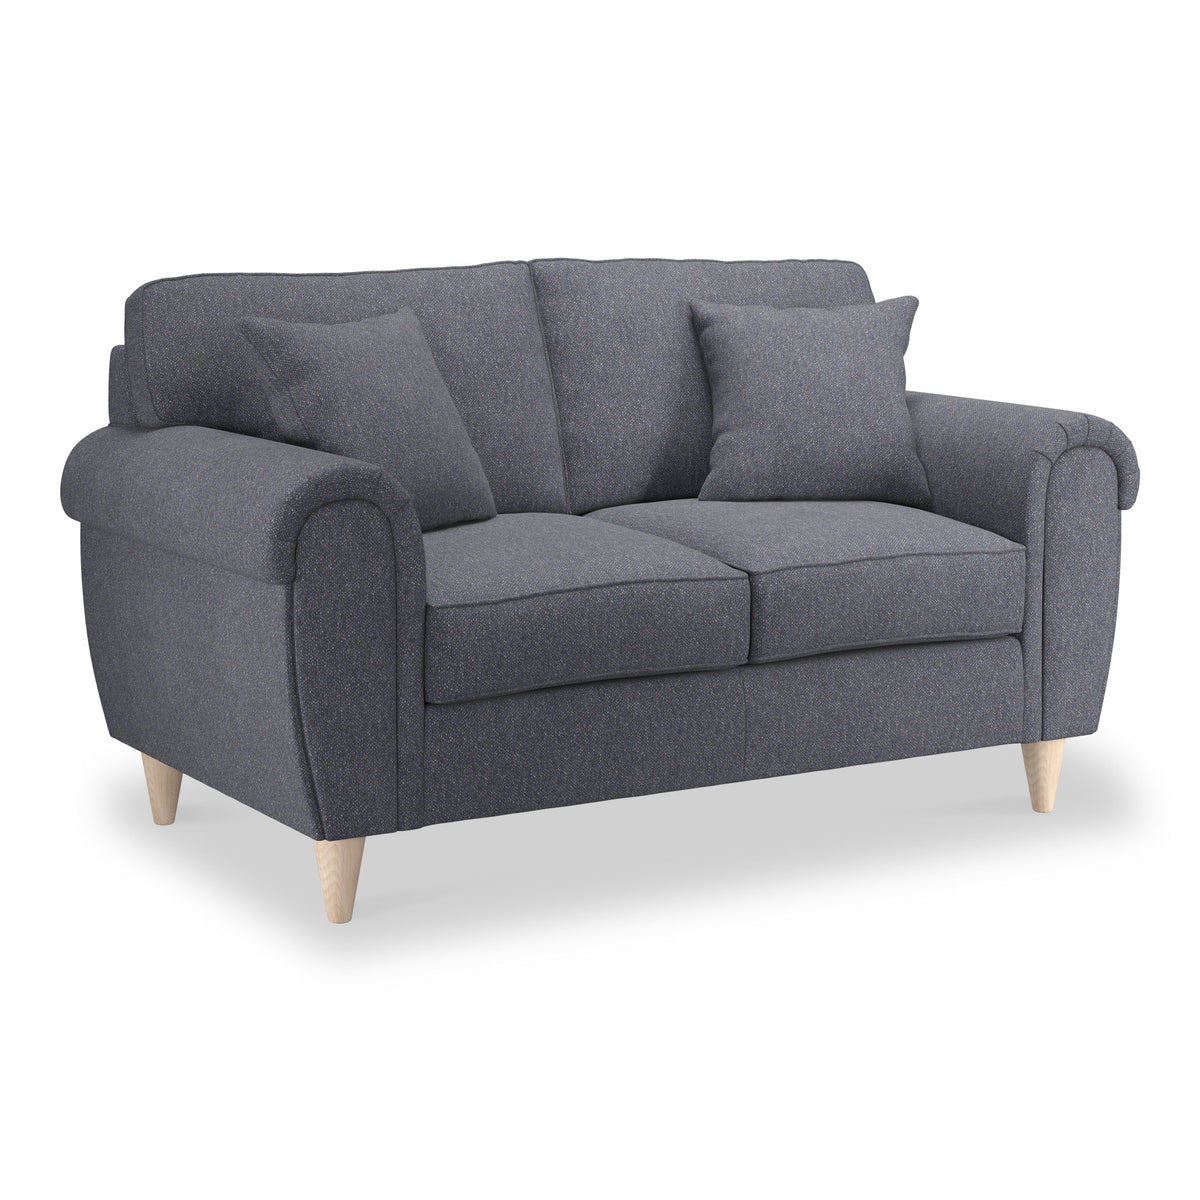 Harry Navy 2 Seater Sofa from Roseland Furniture